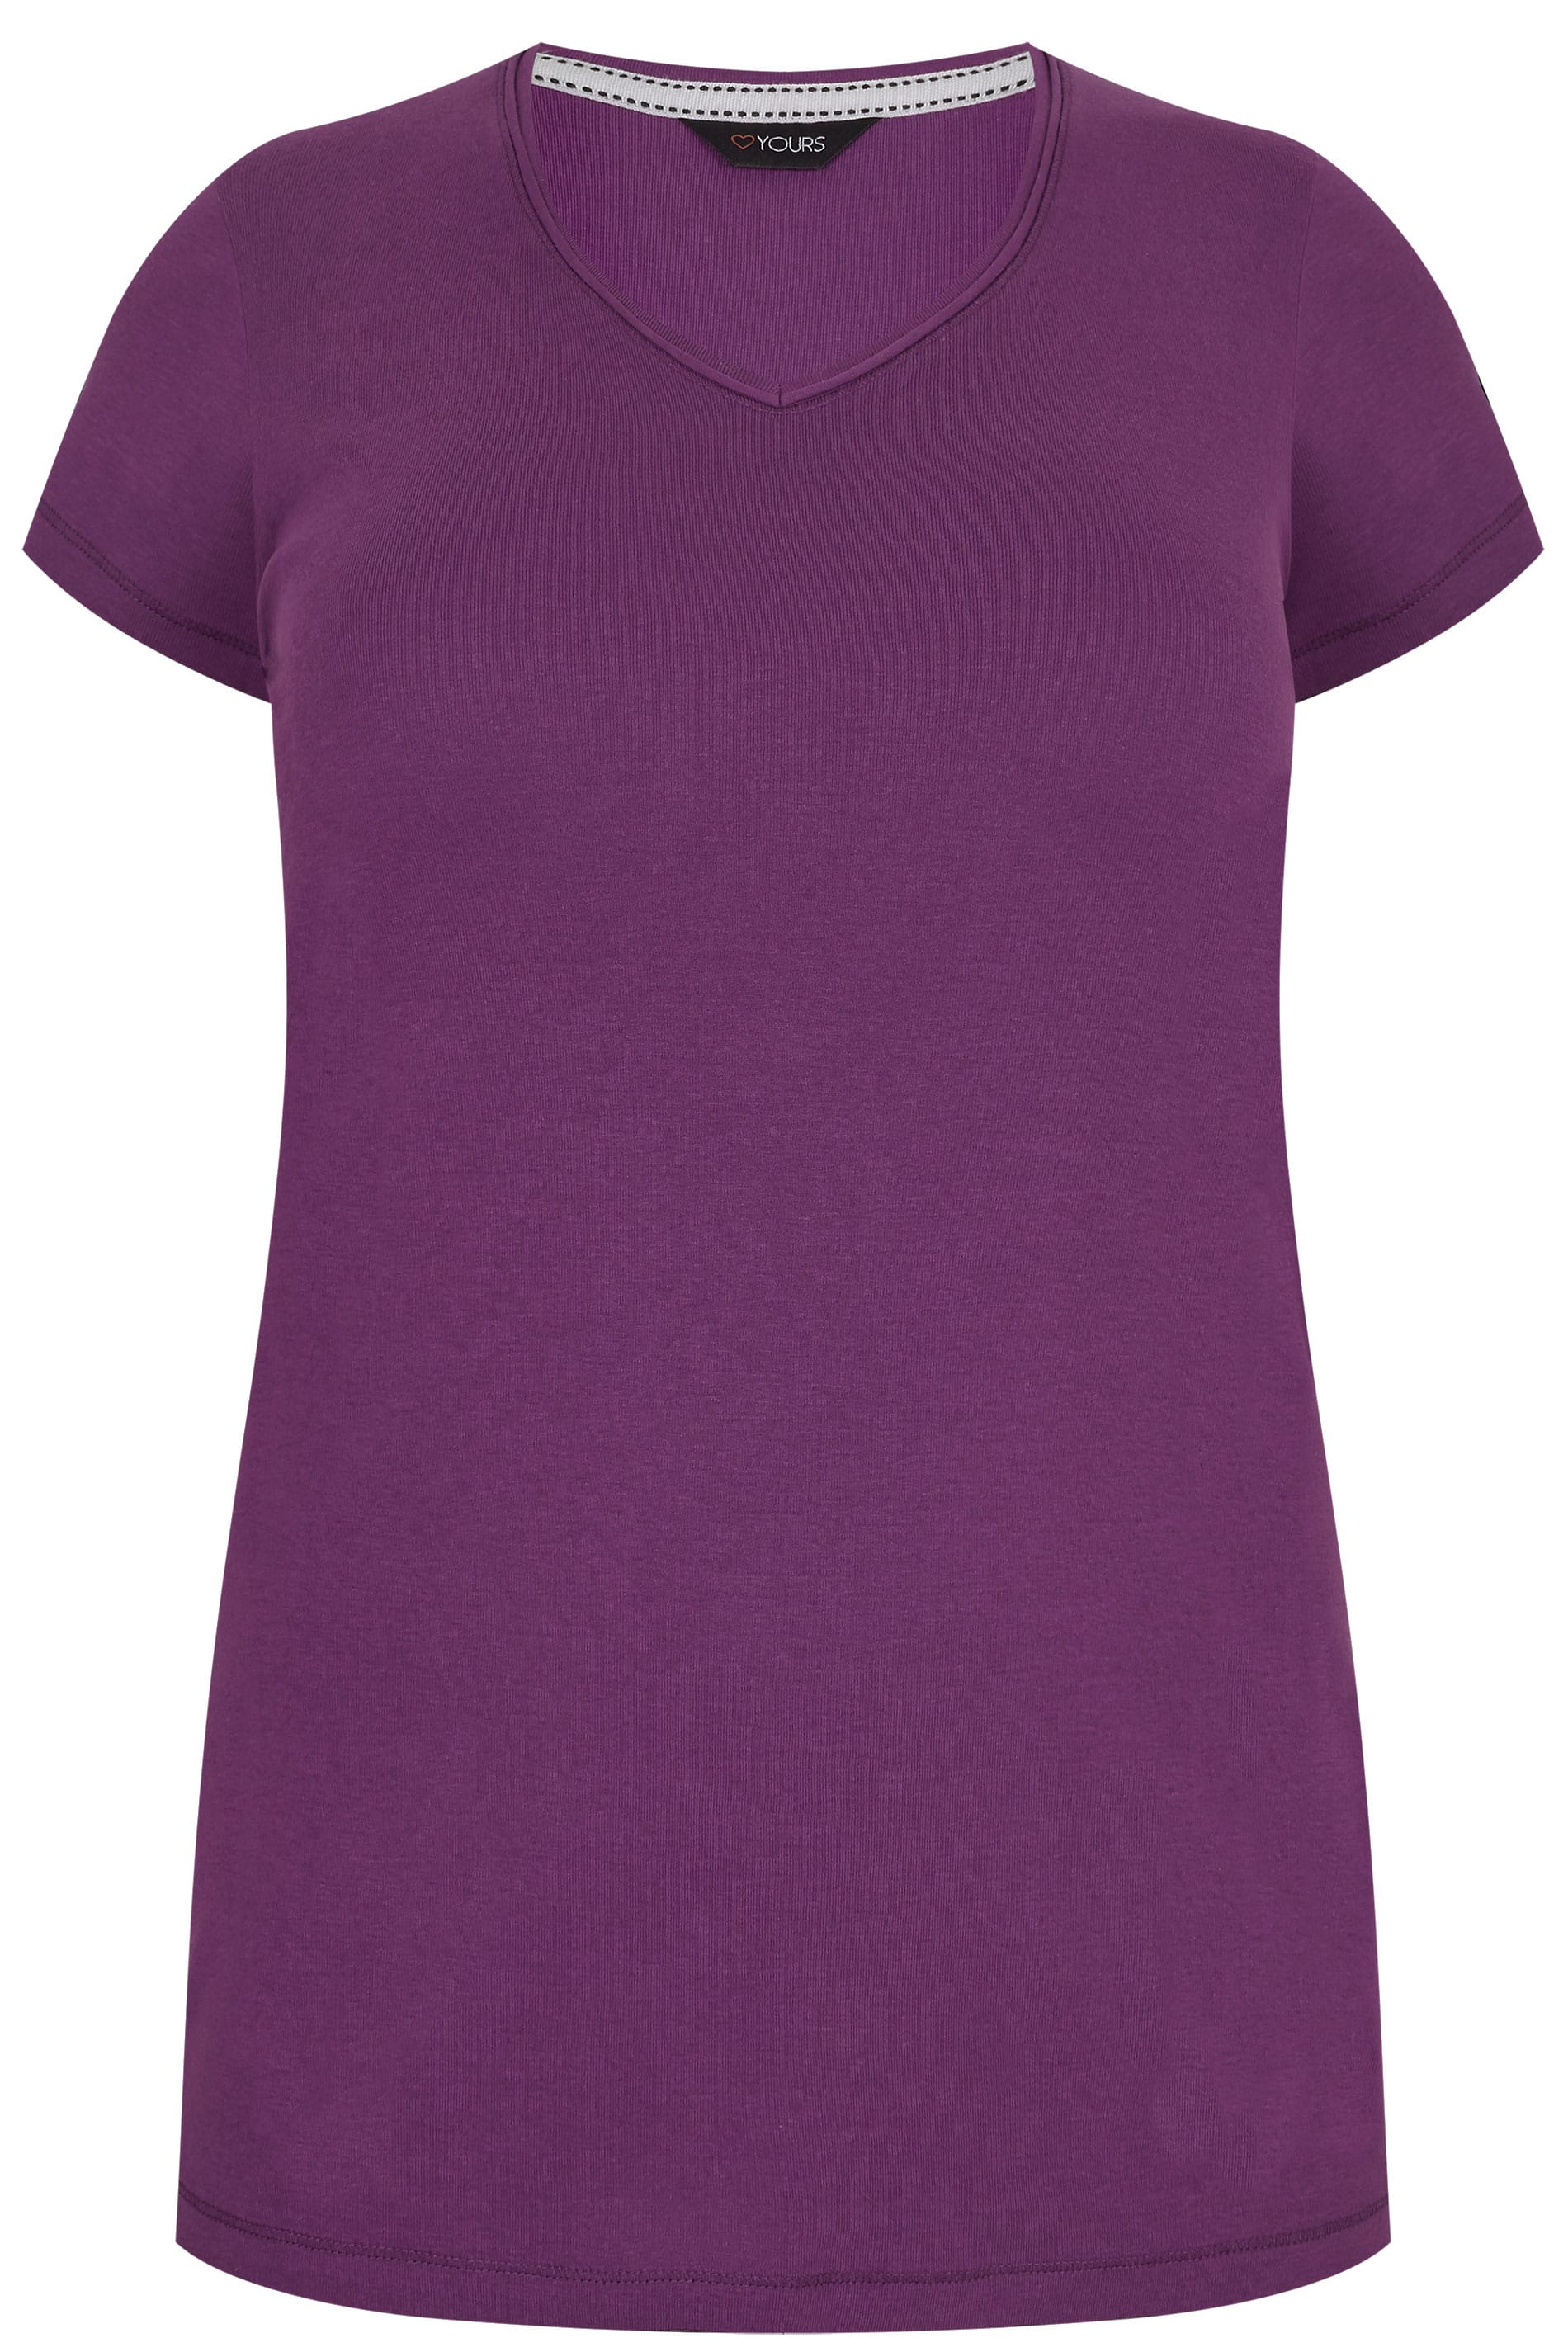 Purple V-Neck T-Shirt | Plus Sizes 16 to 36 | Yours Clothing